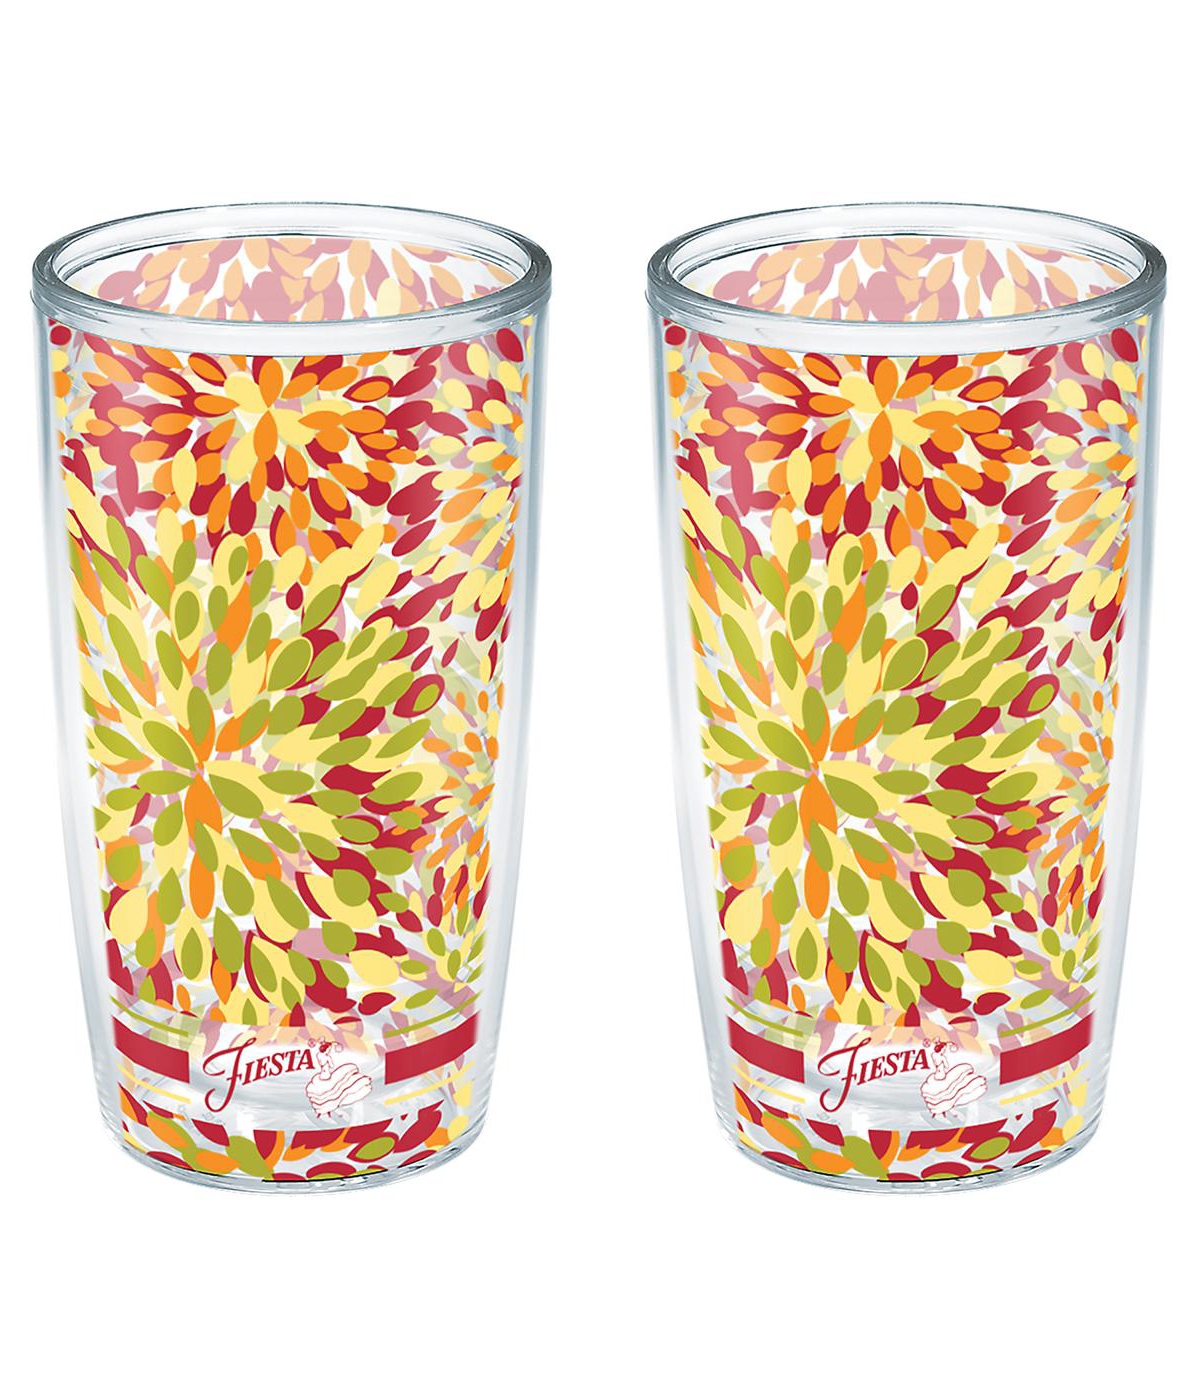 Tervis Tumbler Tervis Fiesta Sunny Calypso Made In Usa Double Walled Insulated Tumbler Cup Keeps Drinks Cold & Hot, In Open Miscellaneous